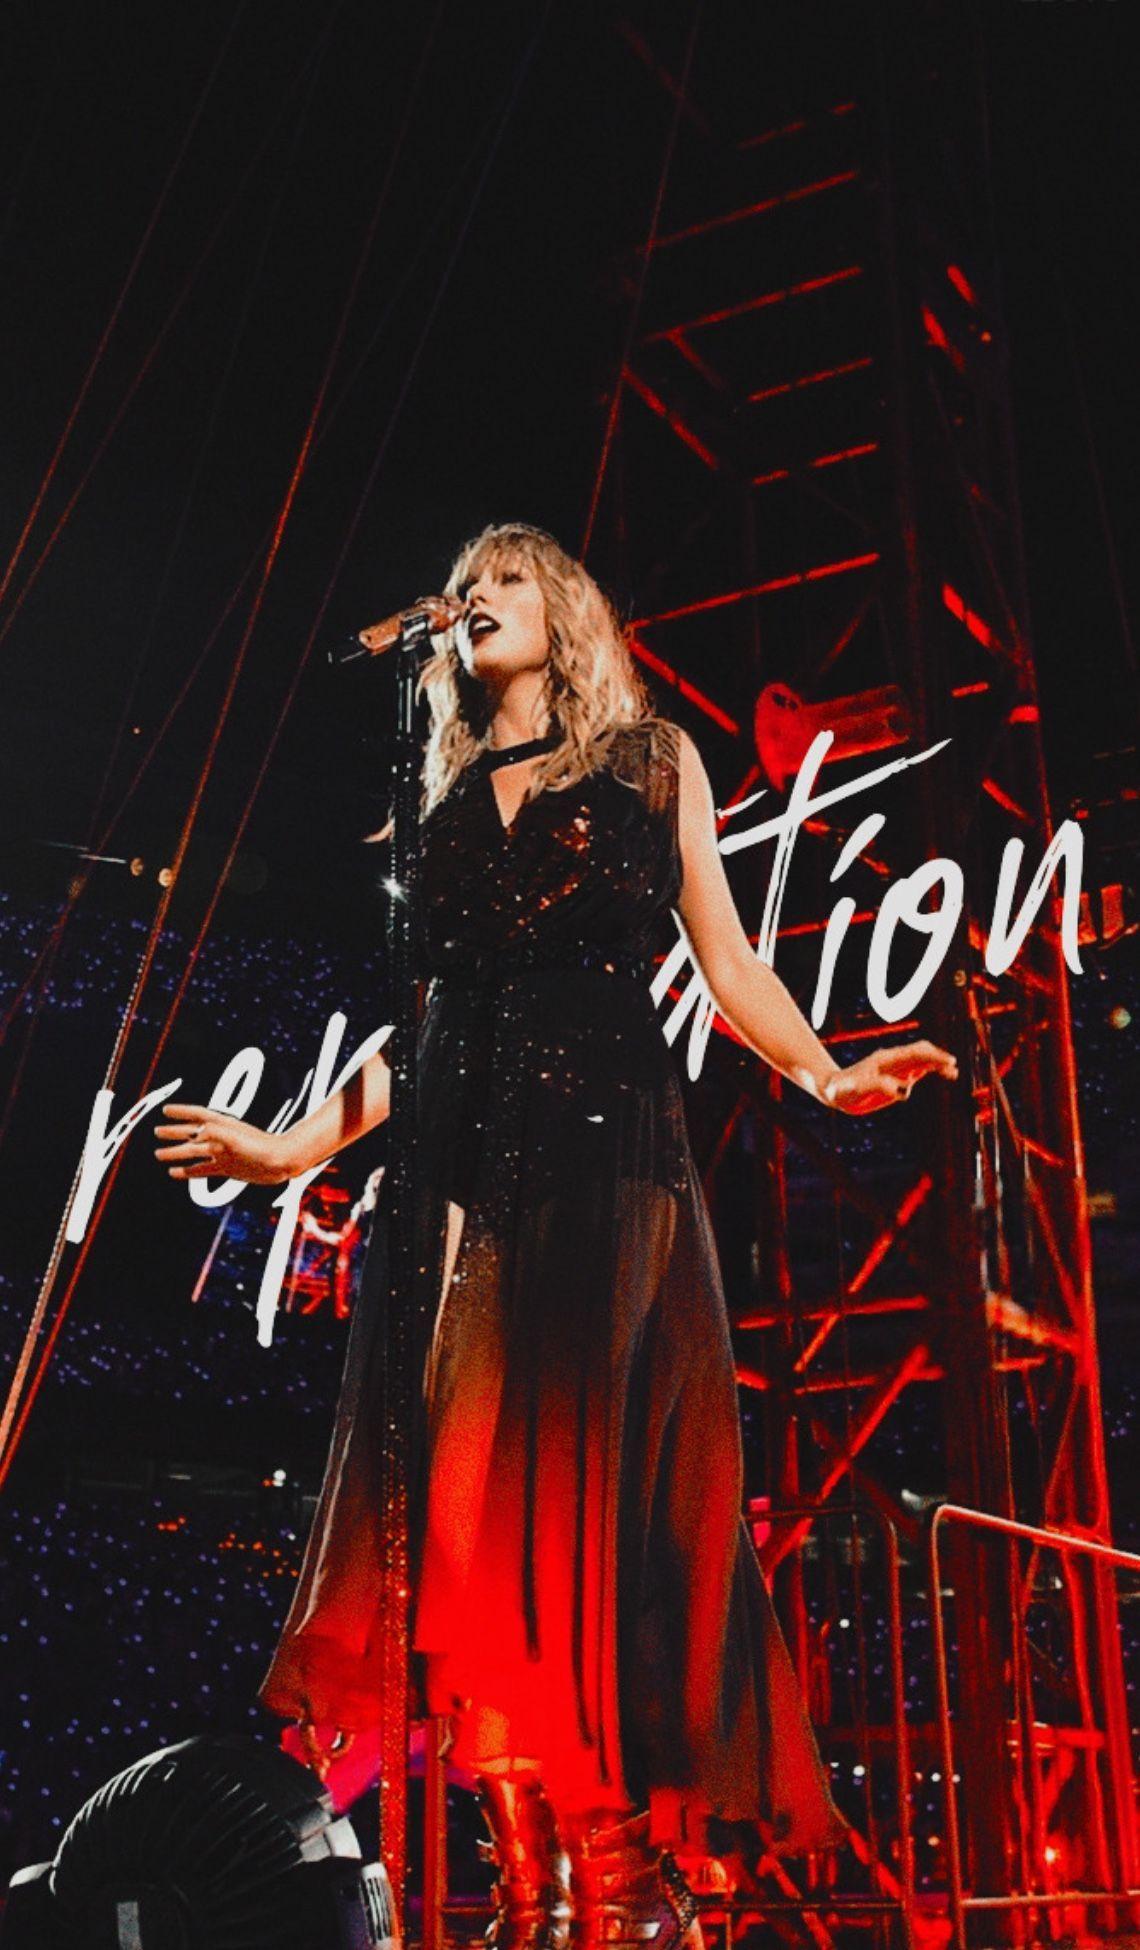 ts locks read pinned on Twitter simple reputation tour Taylor Swift  lockscreenwallpaper  if you use please give credit  httpstcooUzWyy3co5  Twitter